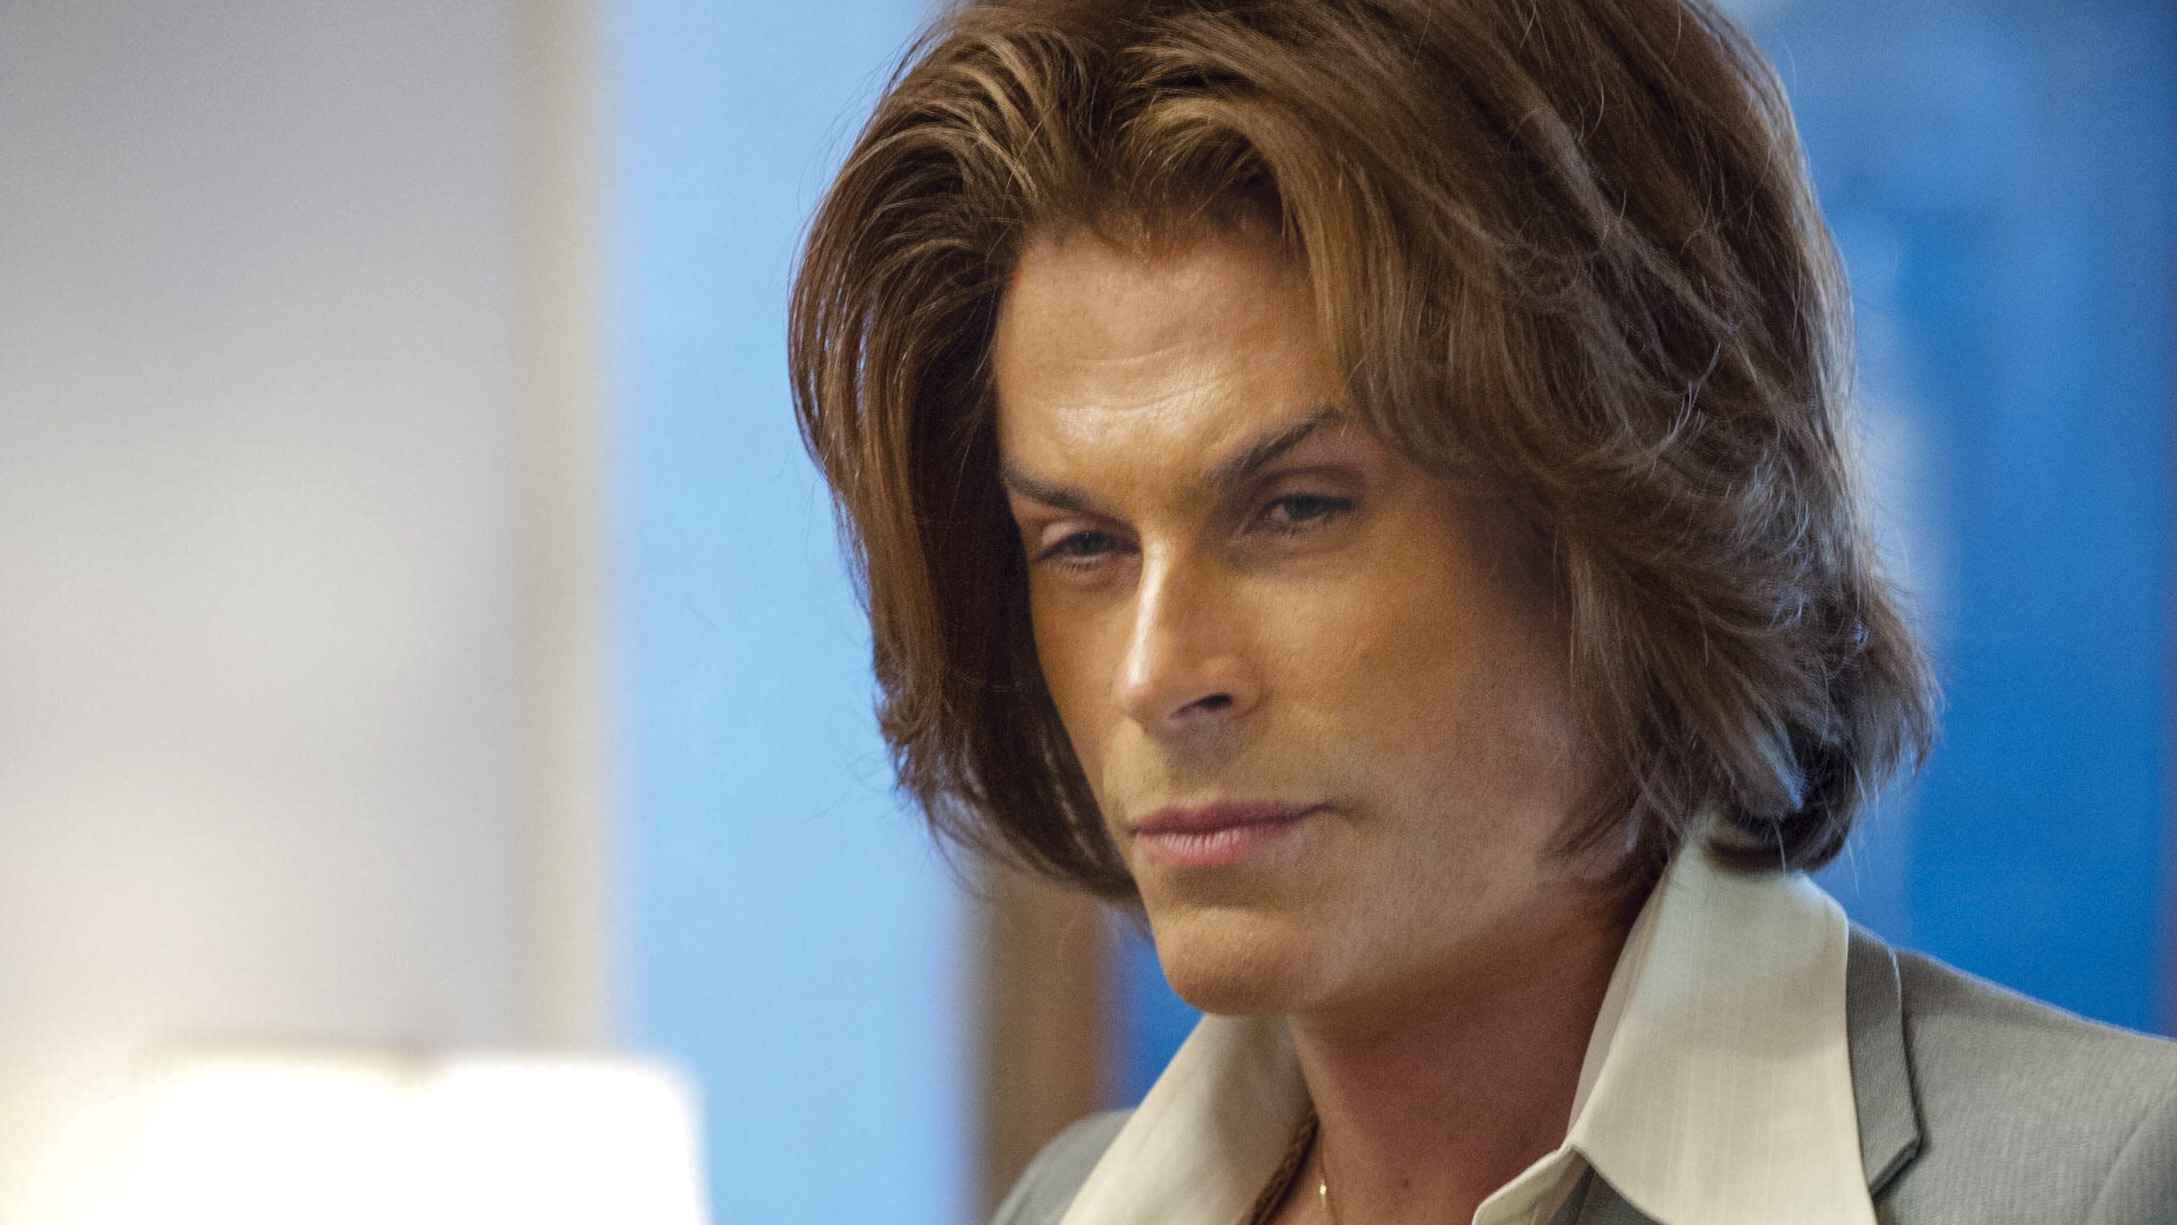 Rob Lowe in Behind The Candelabra